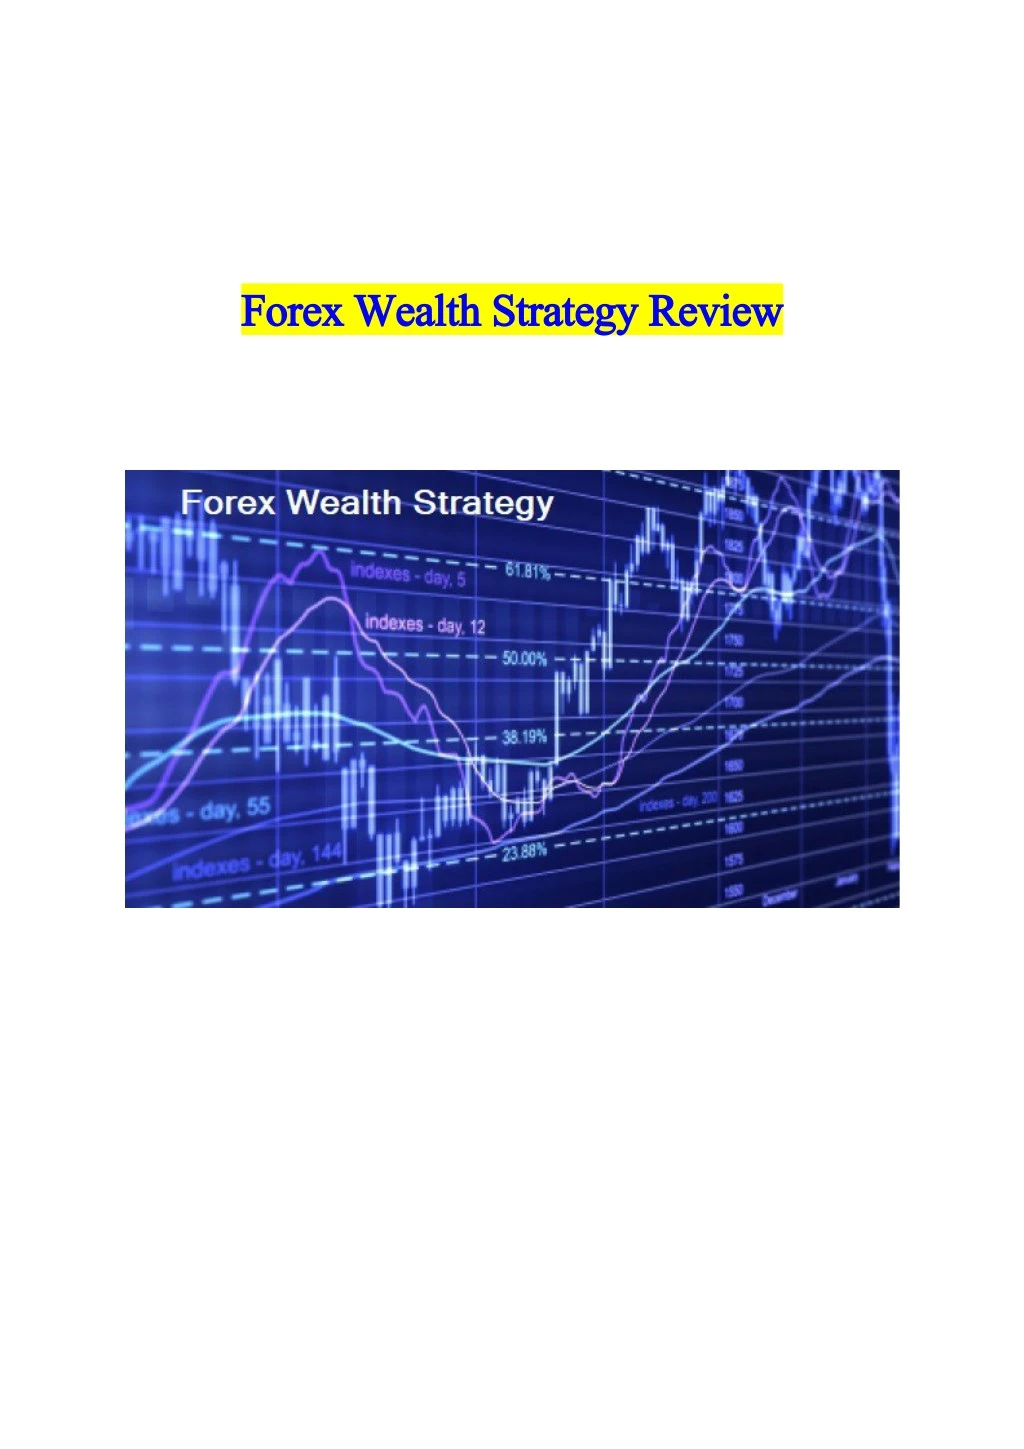 forex wealth strategy review forex wealth